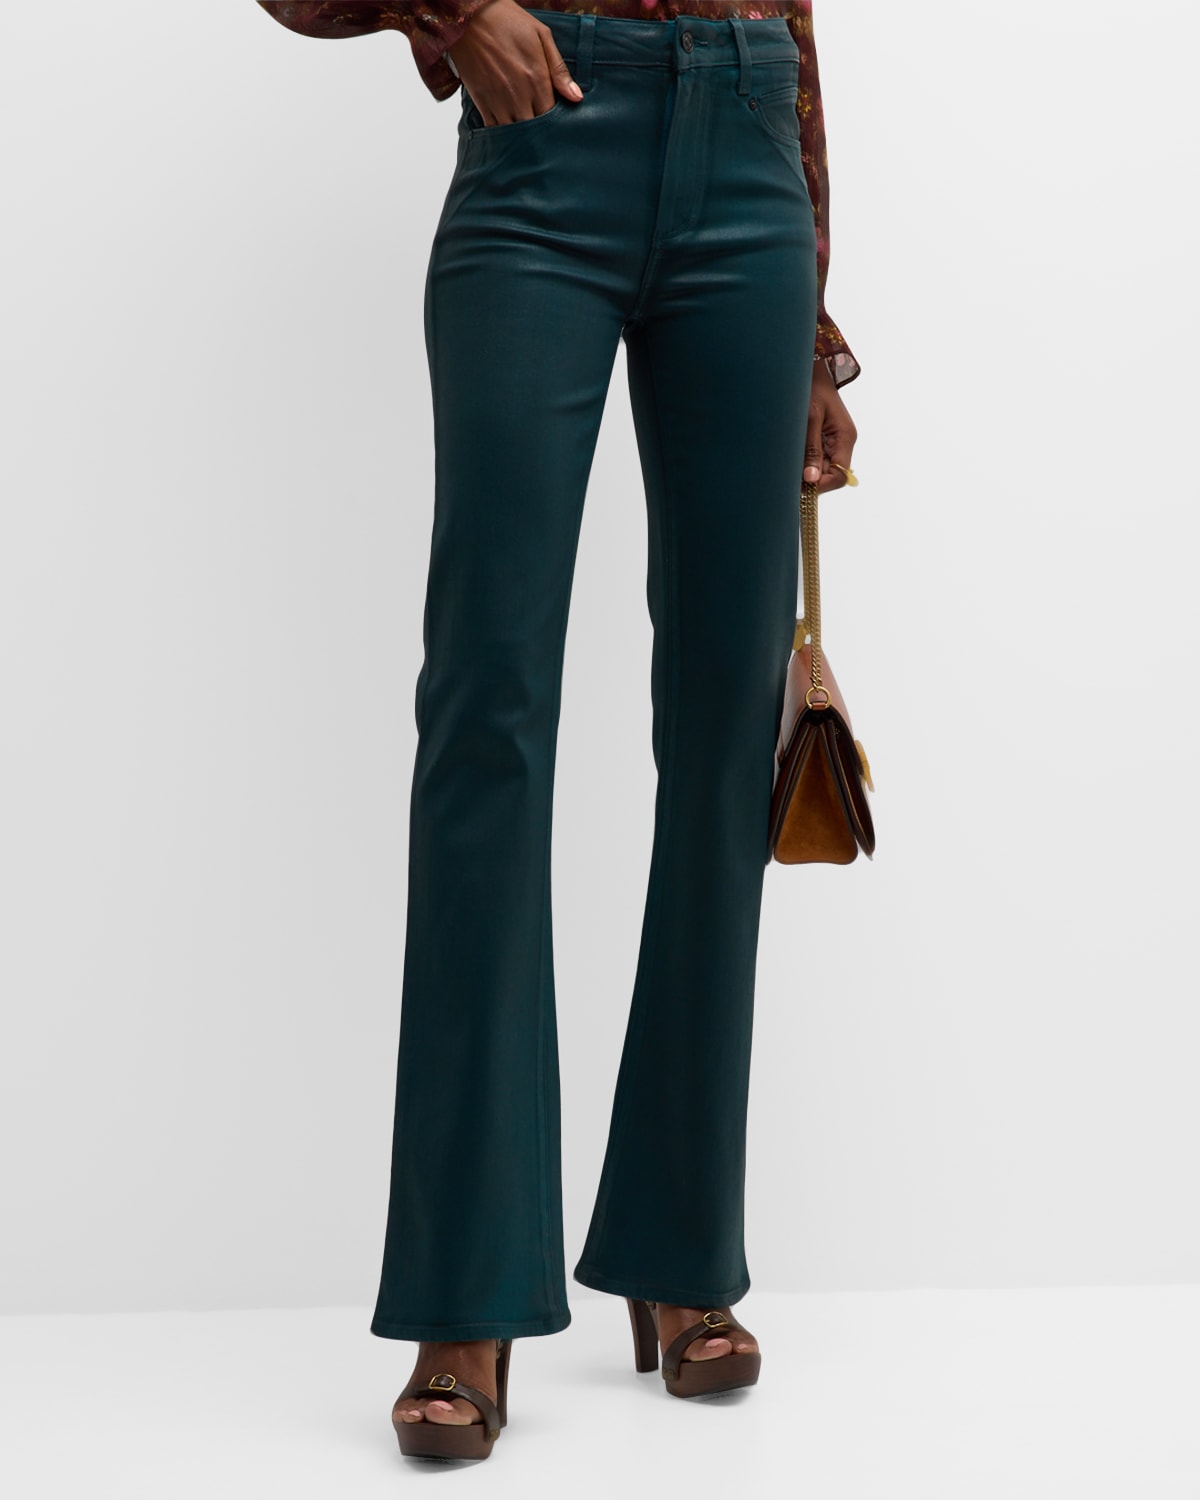 Laurel Canyon High Rise Coated Flare Jeans